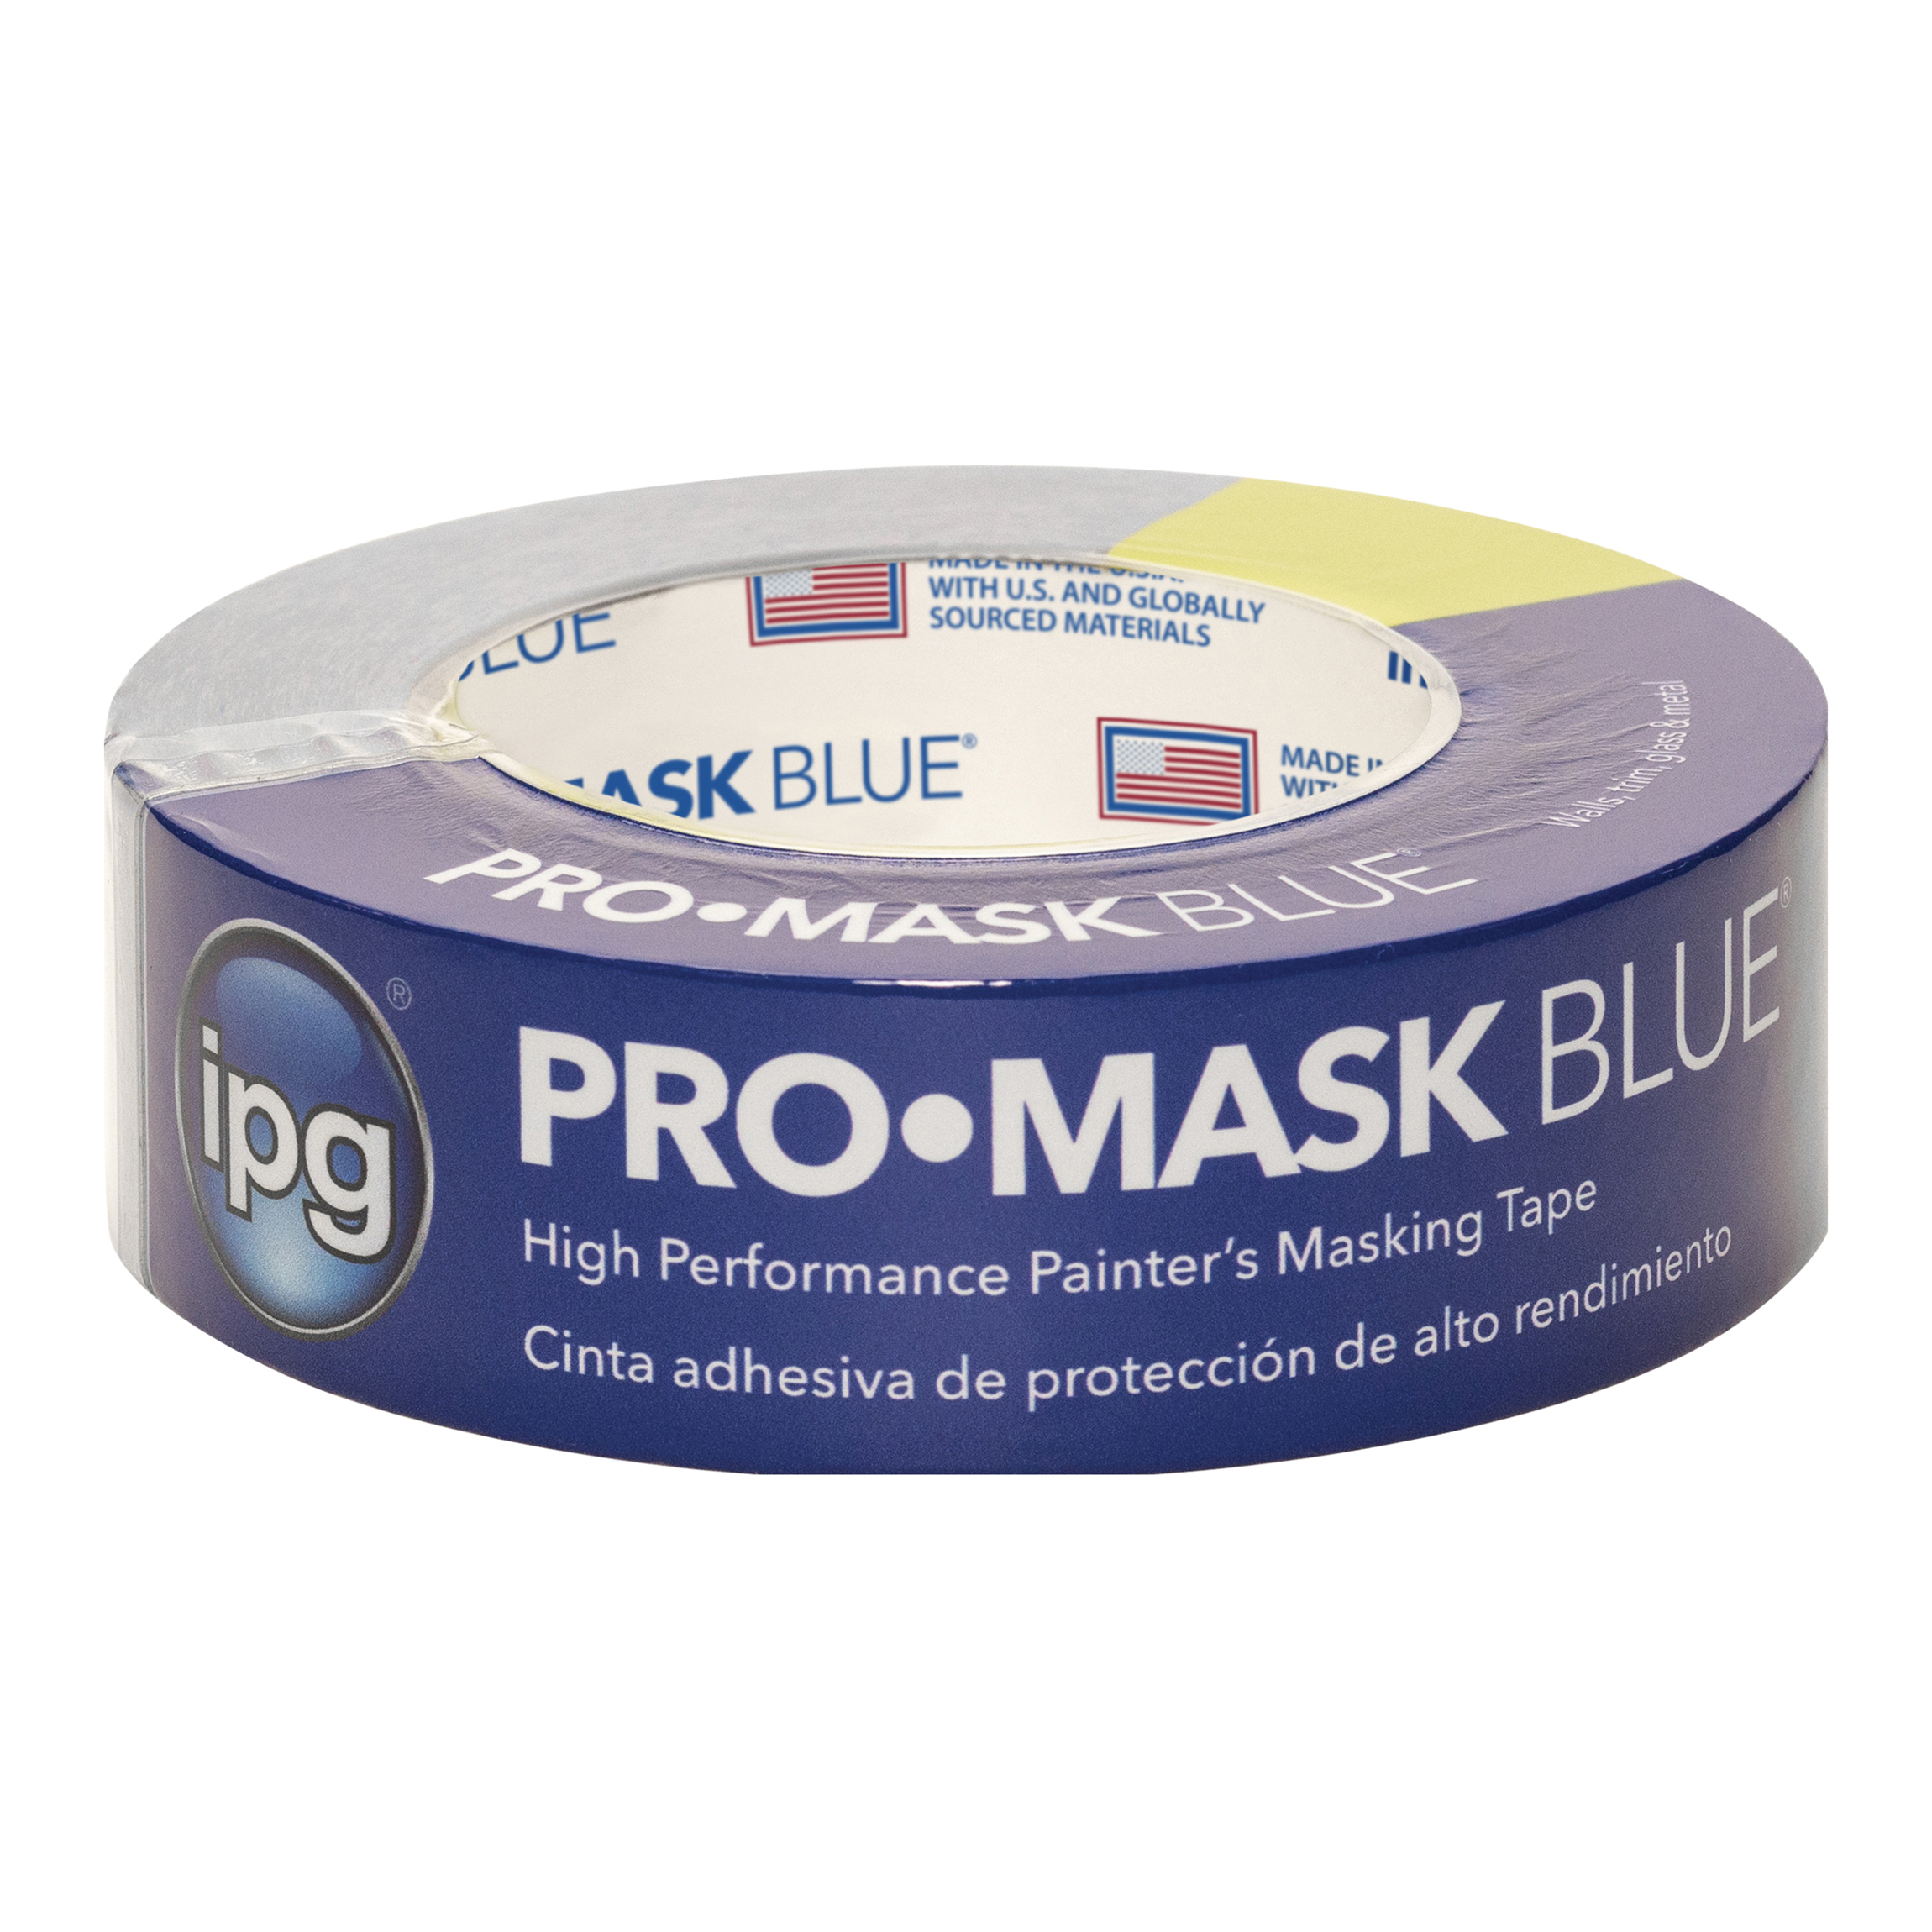 PMD36 Masking Tape, 60 yd L, 1.41 in W, Crepe Paper Backing, Dark Blue